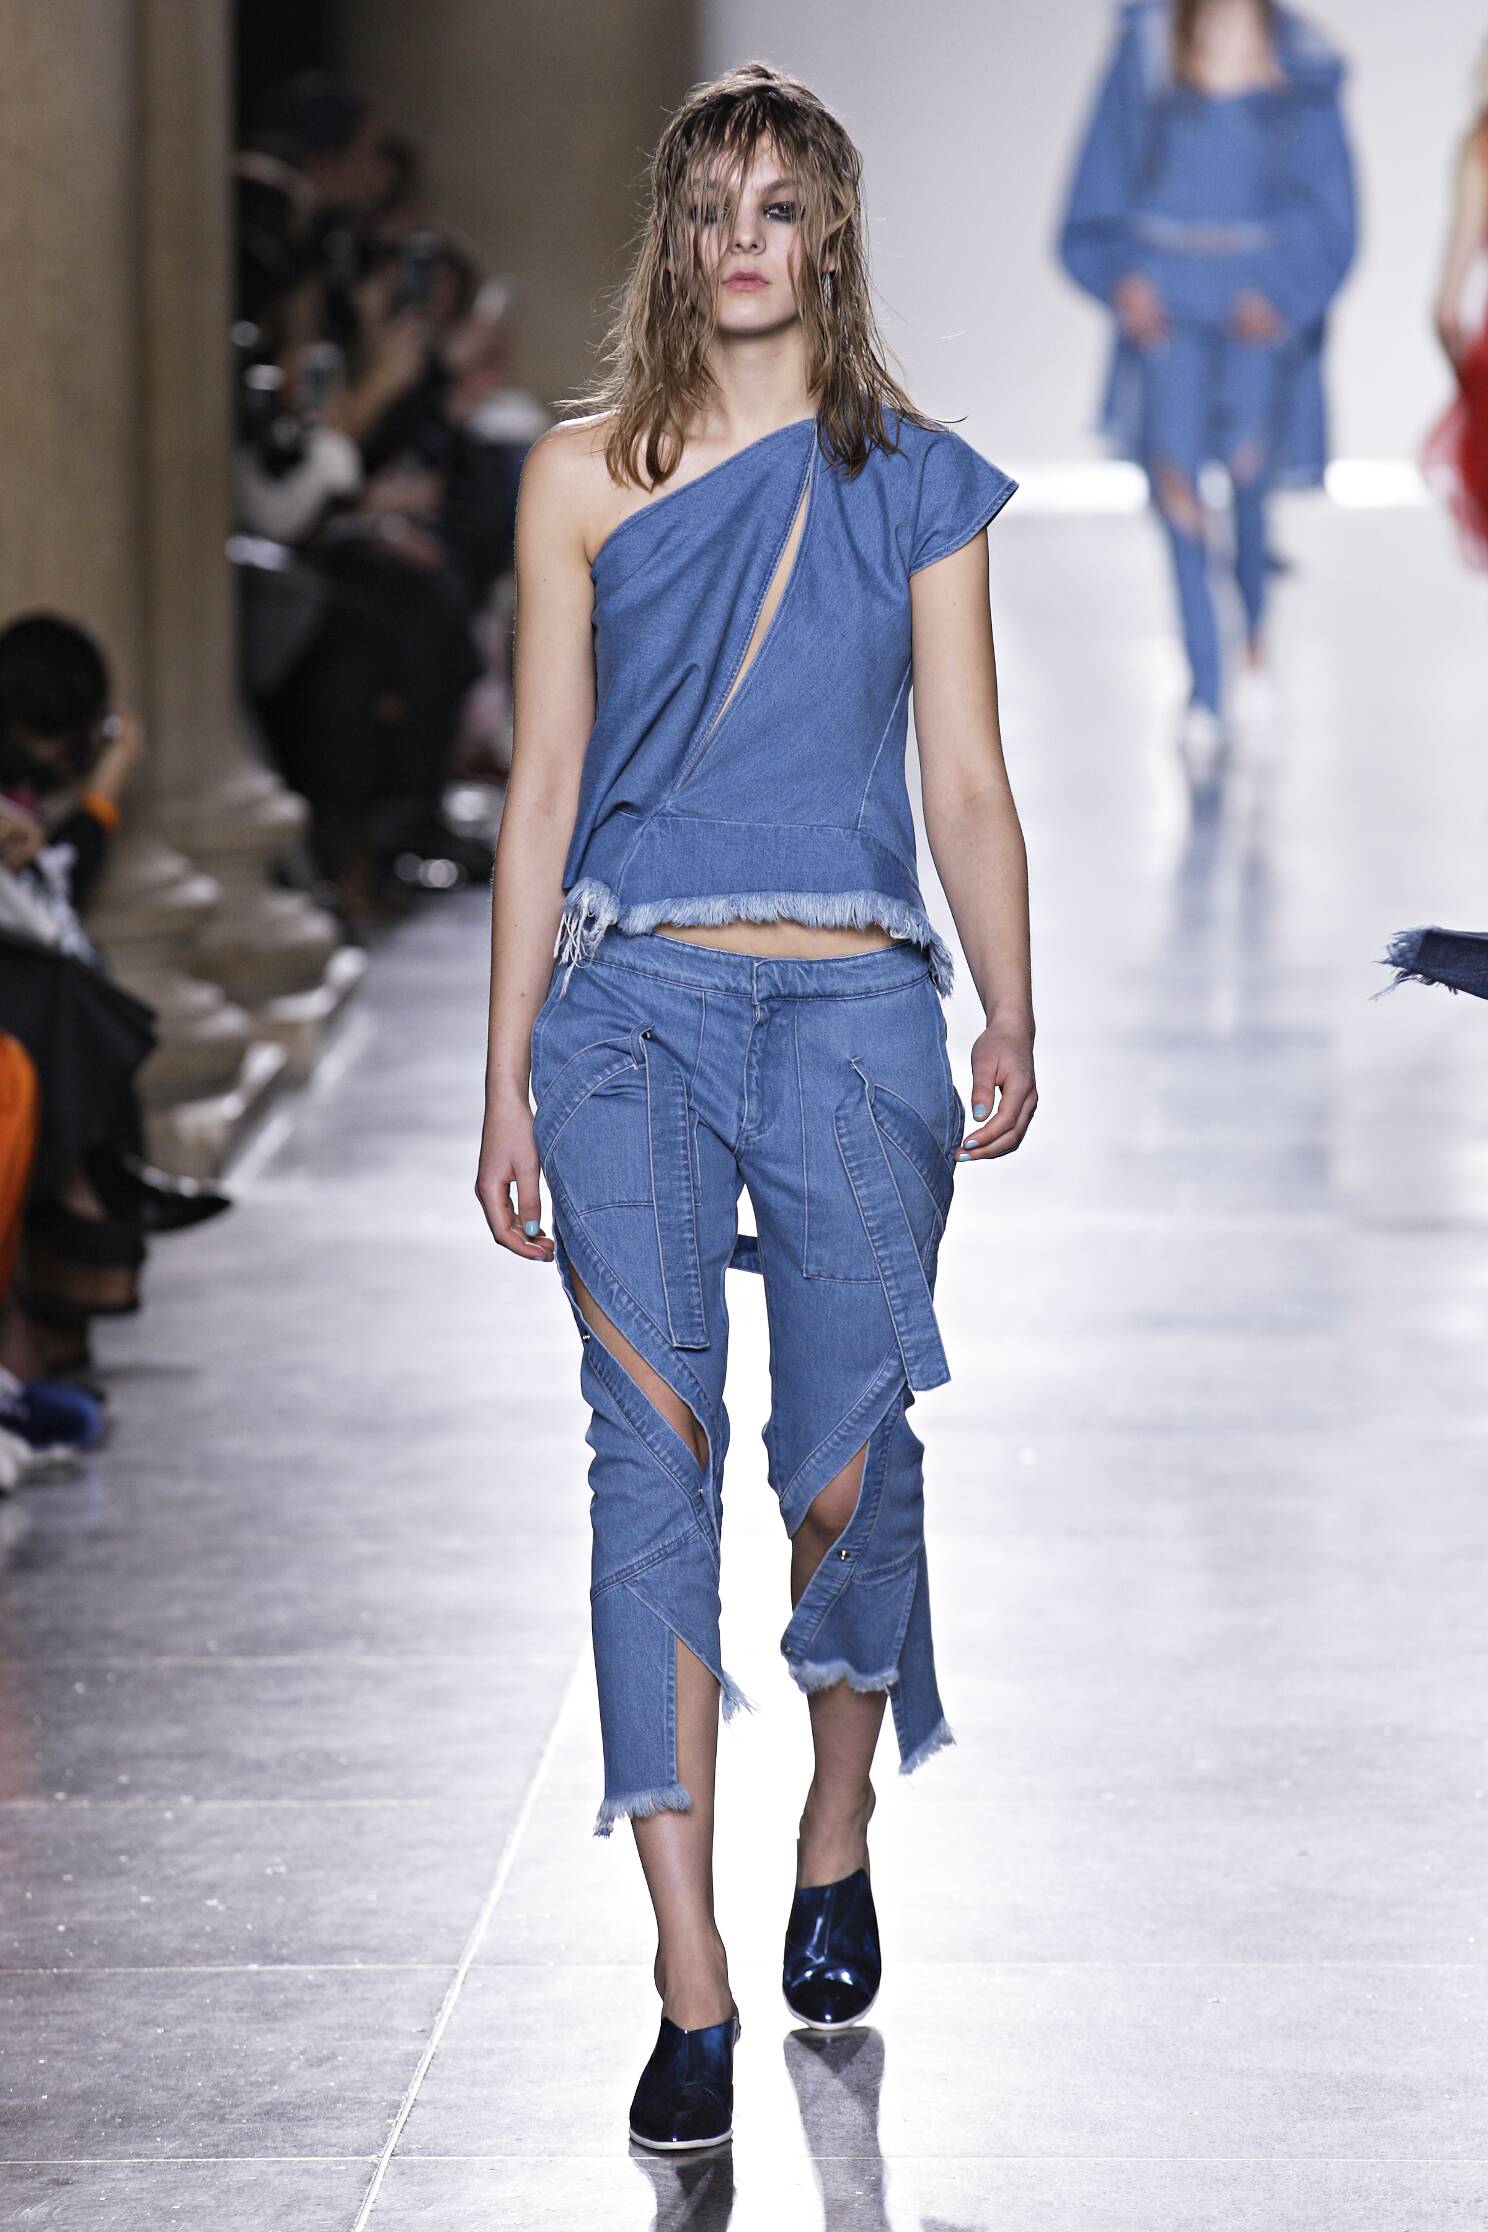 MARQUES ALMEIDA FALL WINTER 2015-16 WOMEN’S COLLECTION | The Skinny Beep